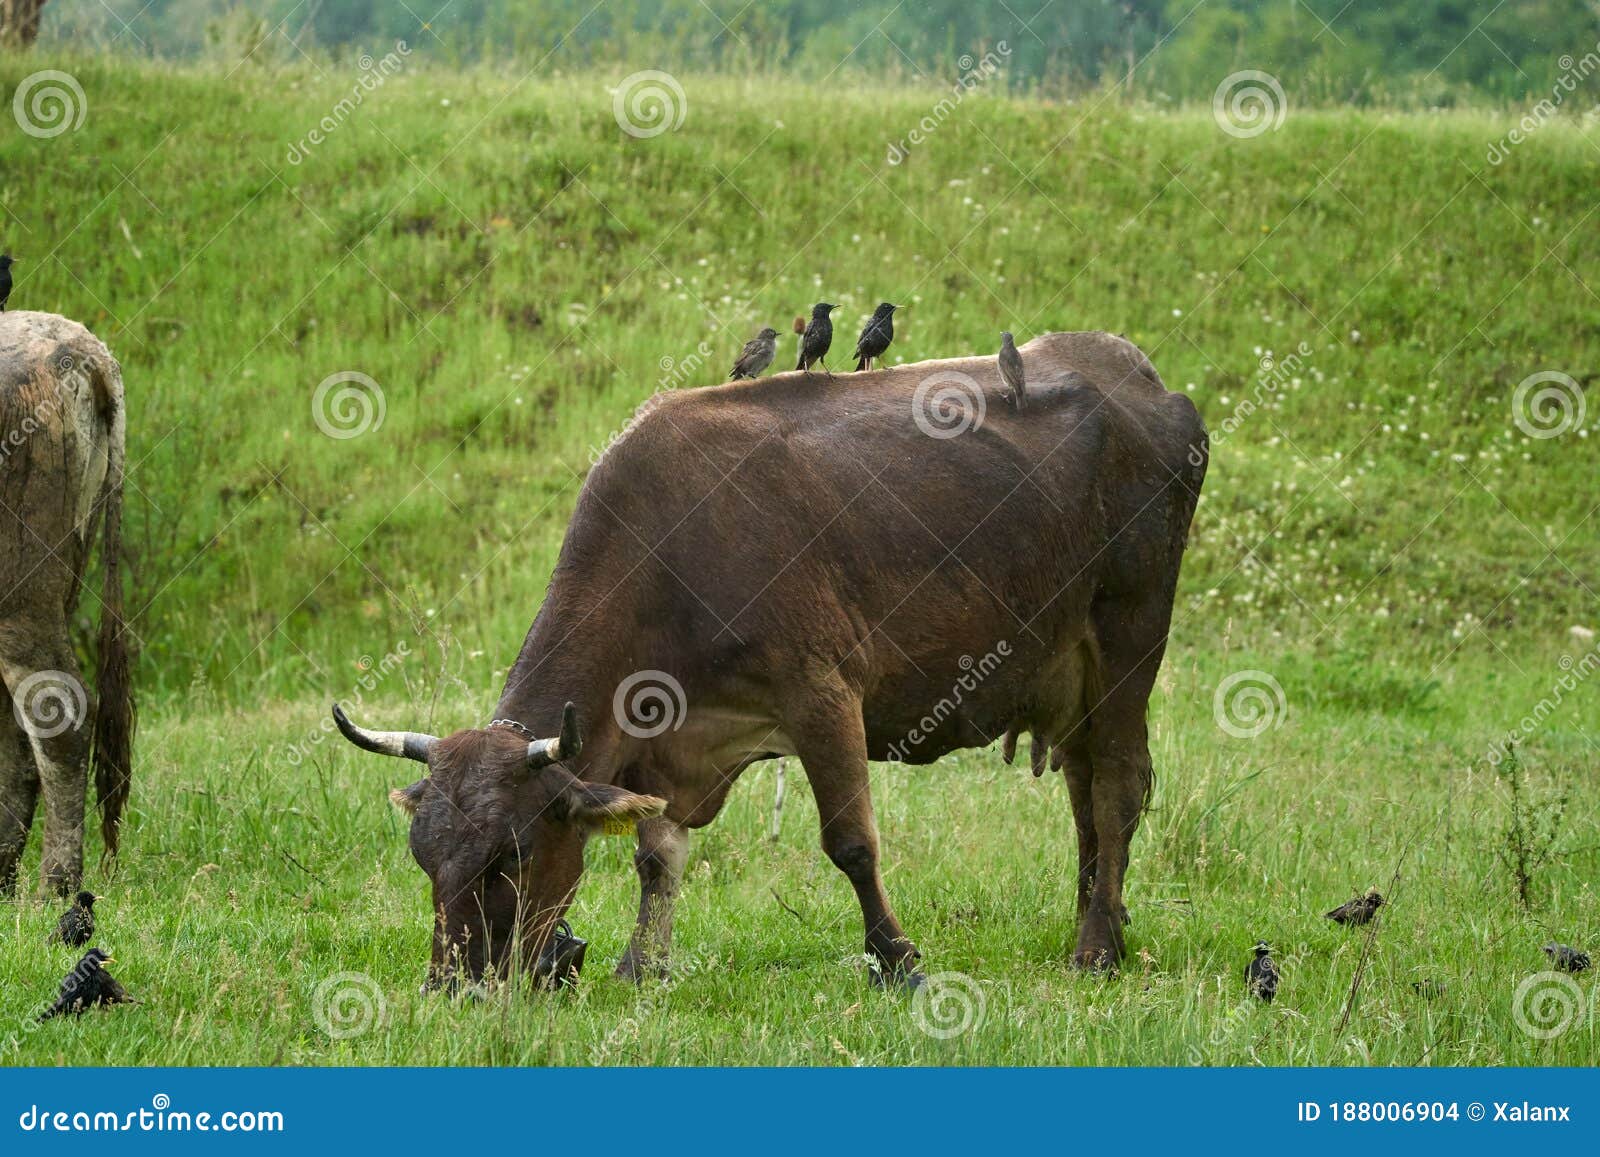 cow being pecked by birds